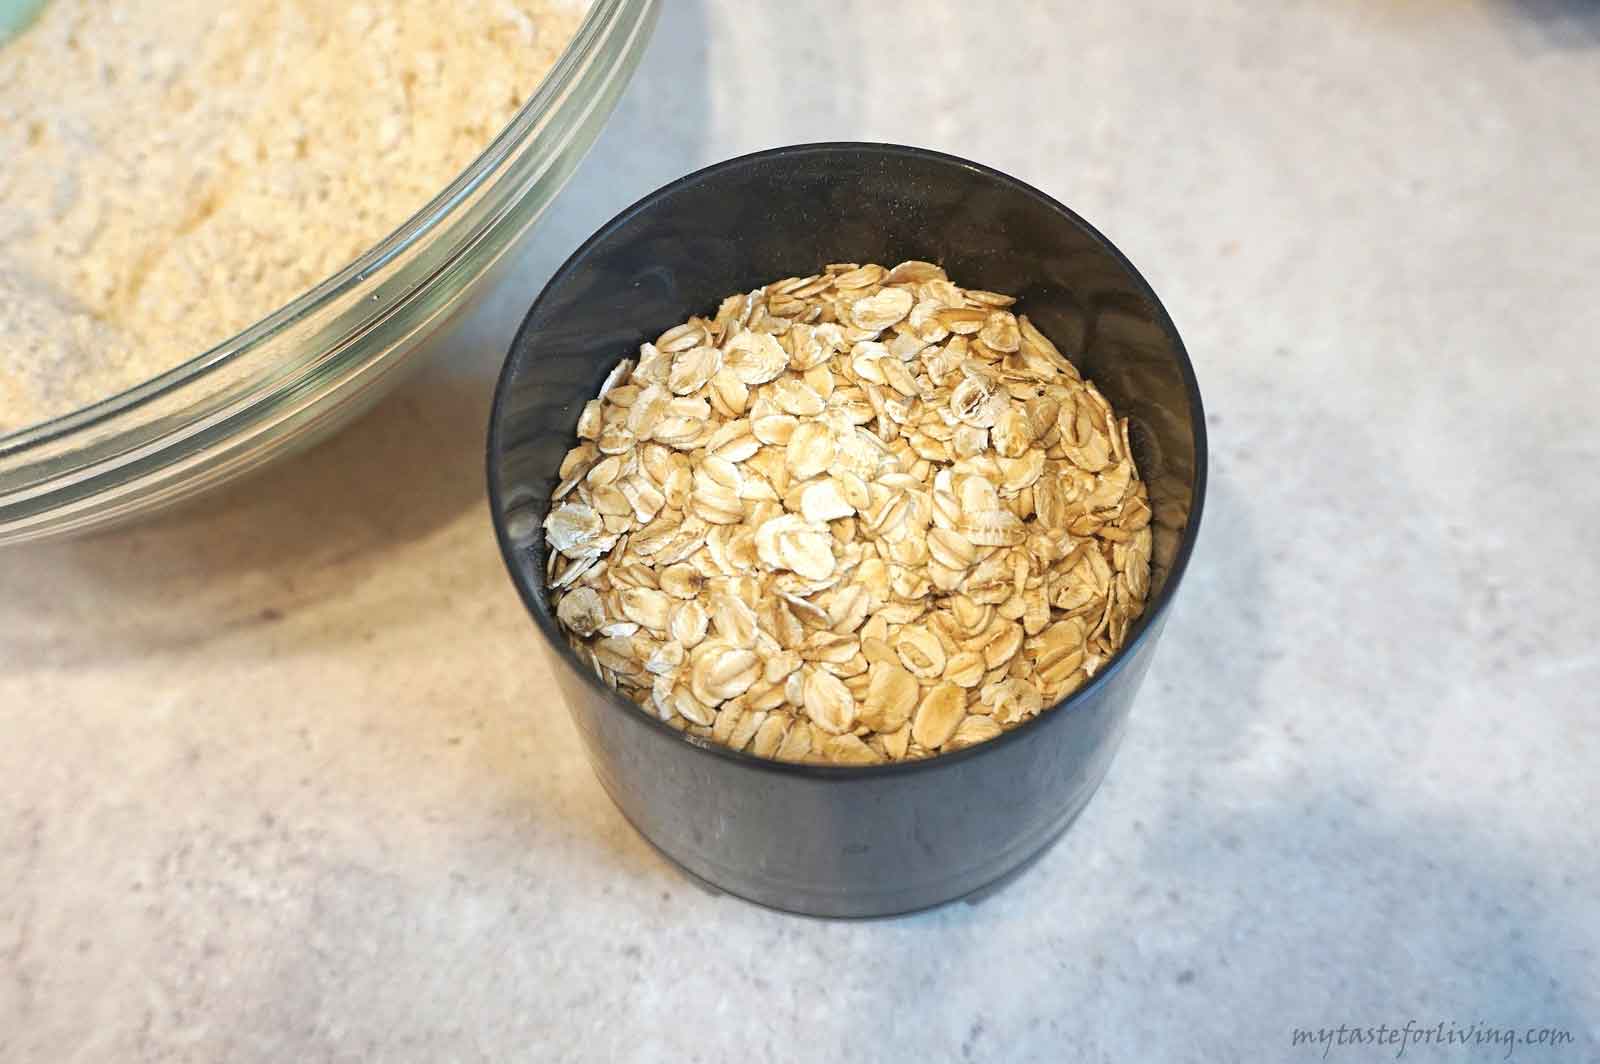 Dairy-free soda bread with einkorn flour and old fashioned rolled oats suitable for your table on Christmas Eve. Why with oats? They make the crust slightly crispy and enhance the aroma and taste that einkorn flour gives.